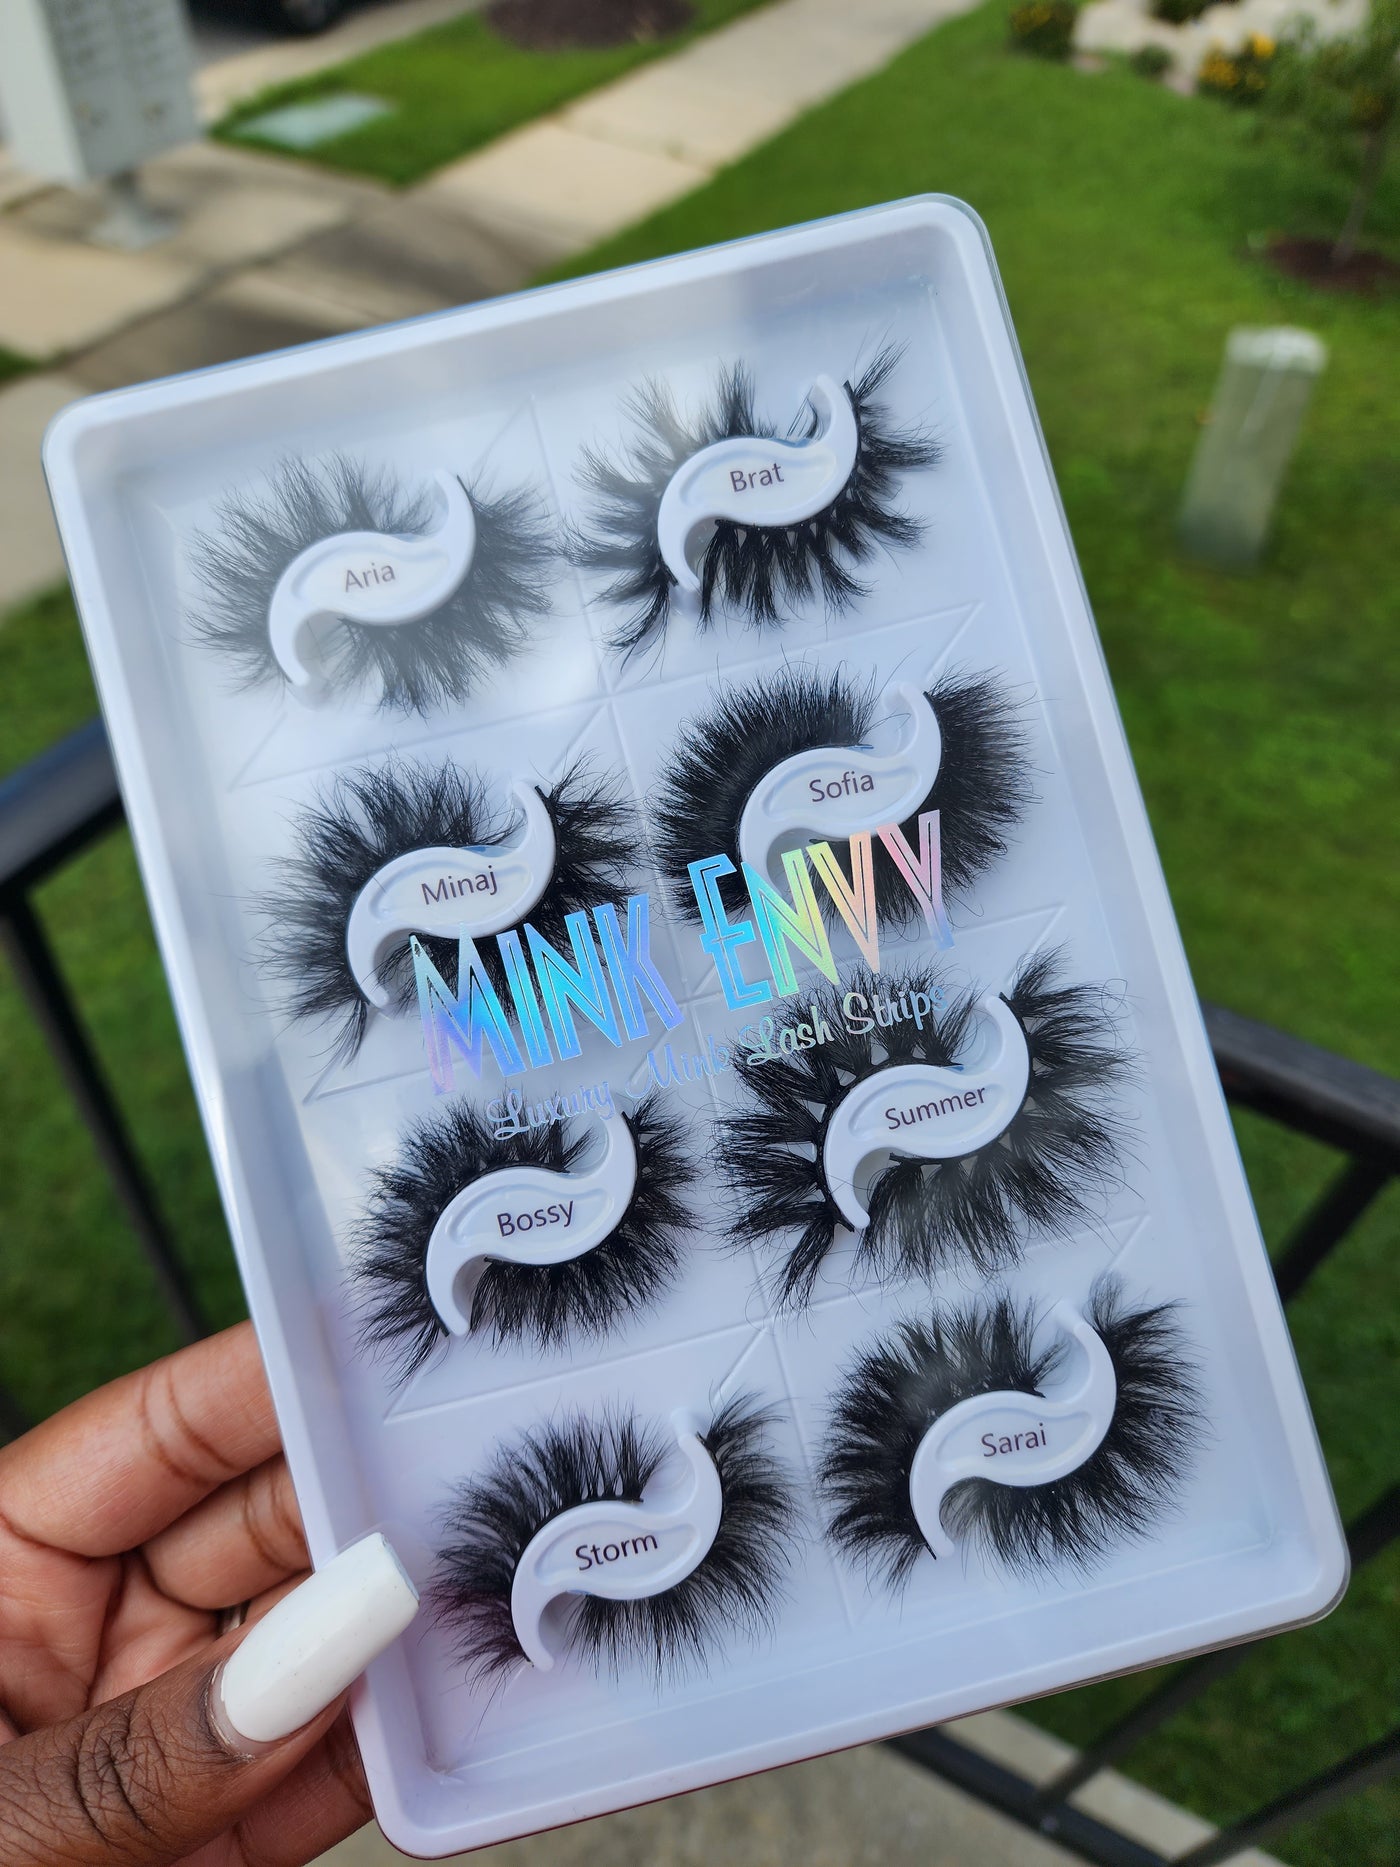 The MINI Wispy Book of Lashes 16-20mm - Mink Envy Lashes